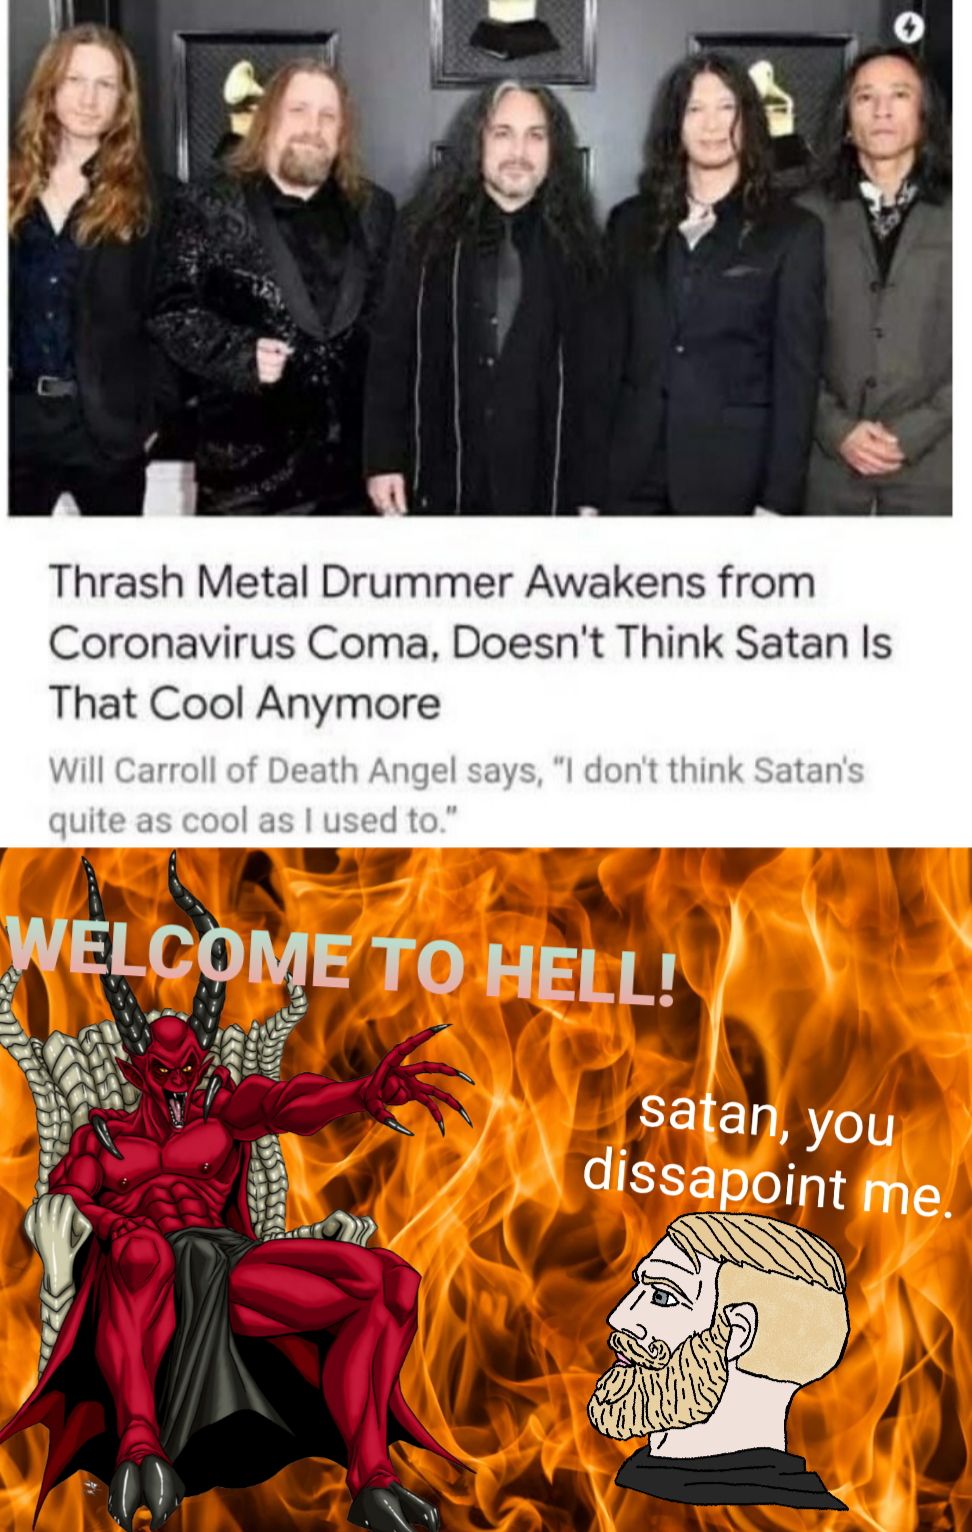 funny memes - satan tumblr funny - Thrash Metal Drummer Awakens from Coronavirus Coma, Doesn't Think Satan is That Cool Anymore Will Carroll of Death Angel says, "I don't think Satan's quite as cool as I used to." Welcome To Hell! satan, you dissapoint me